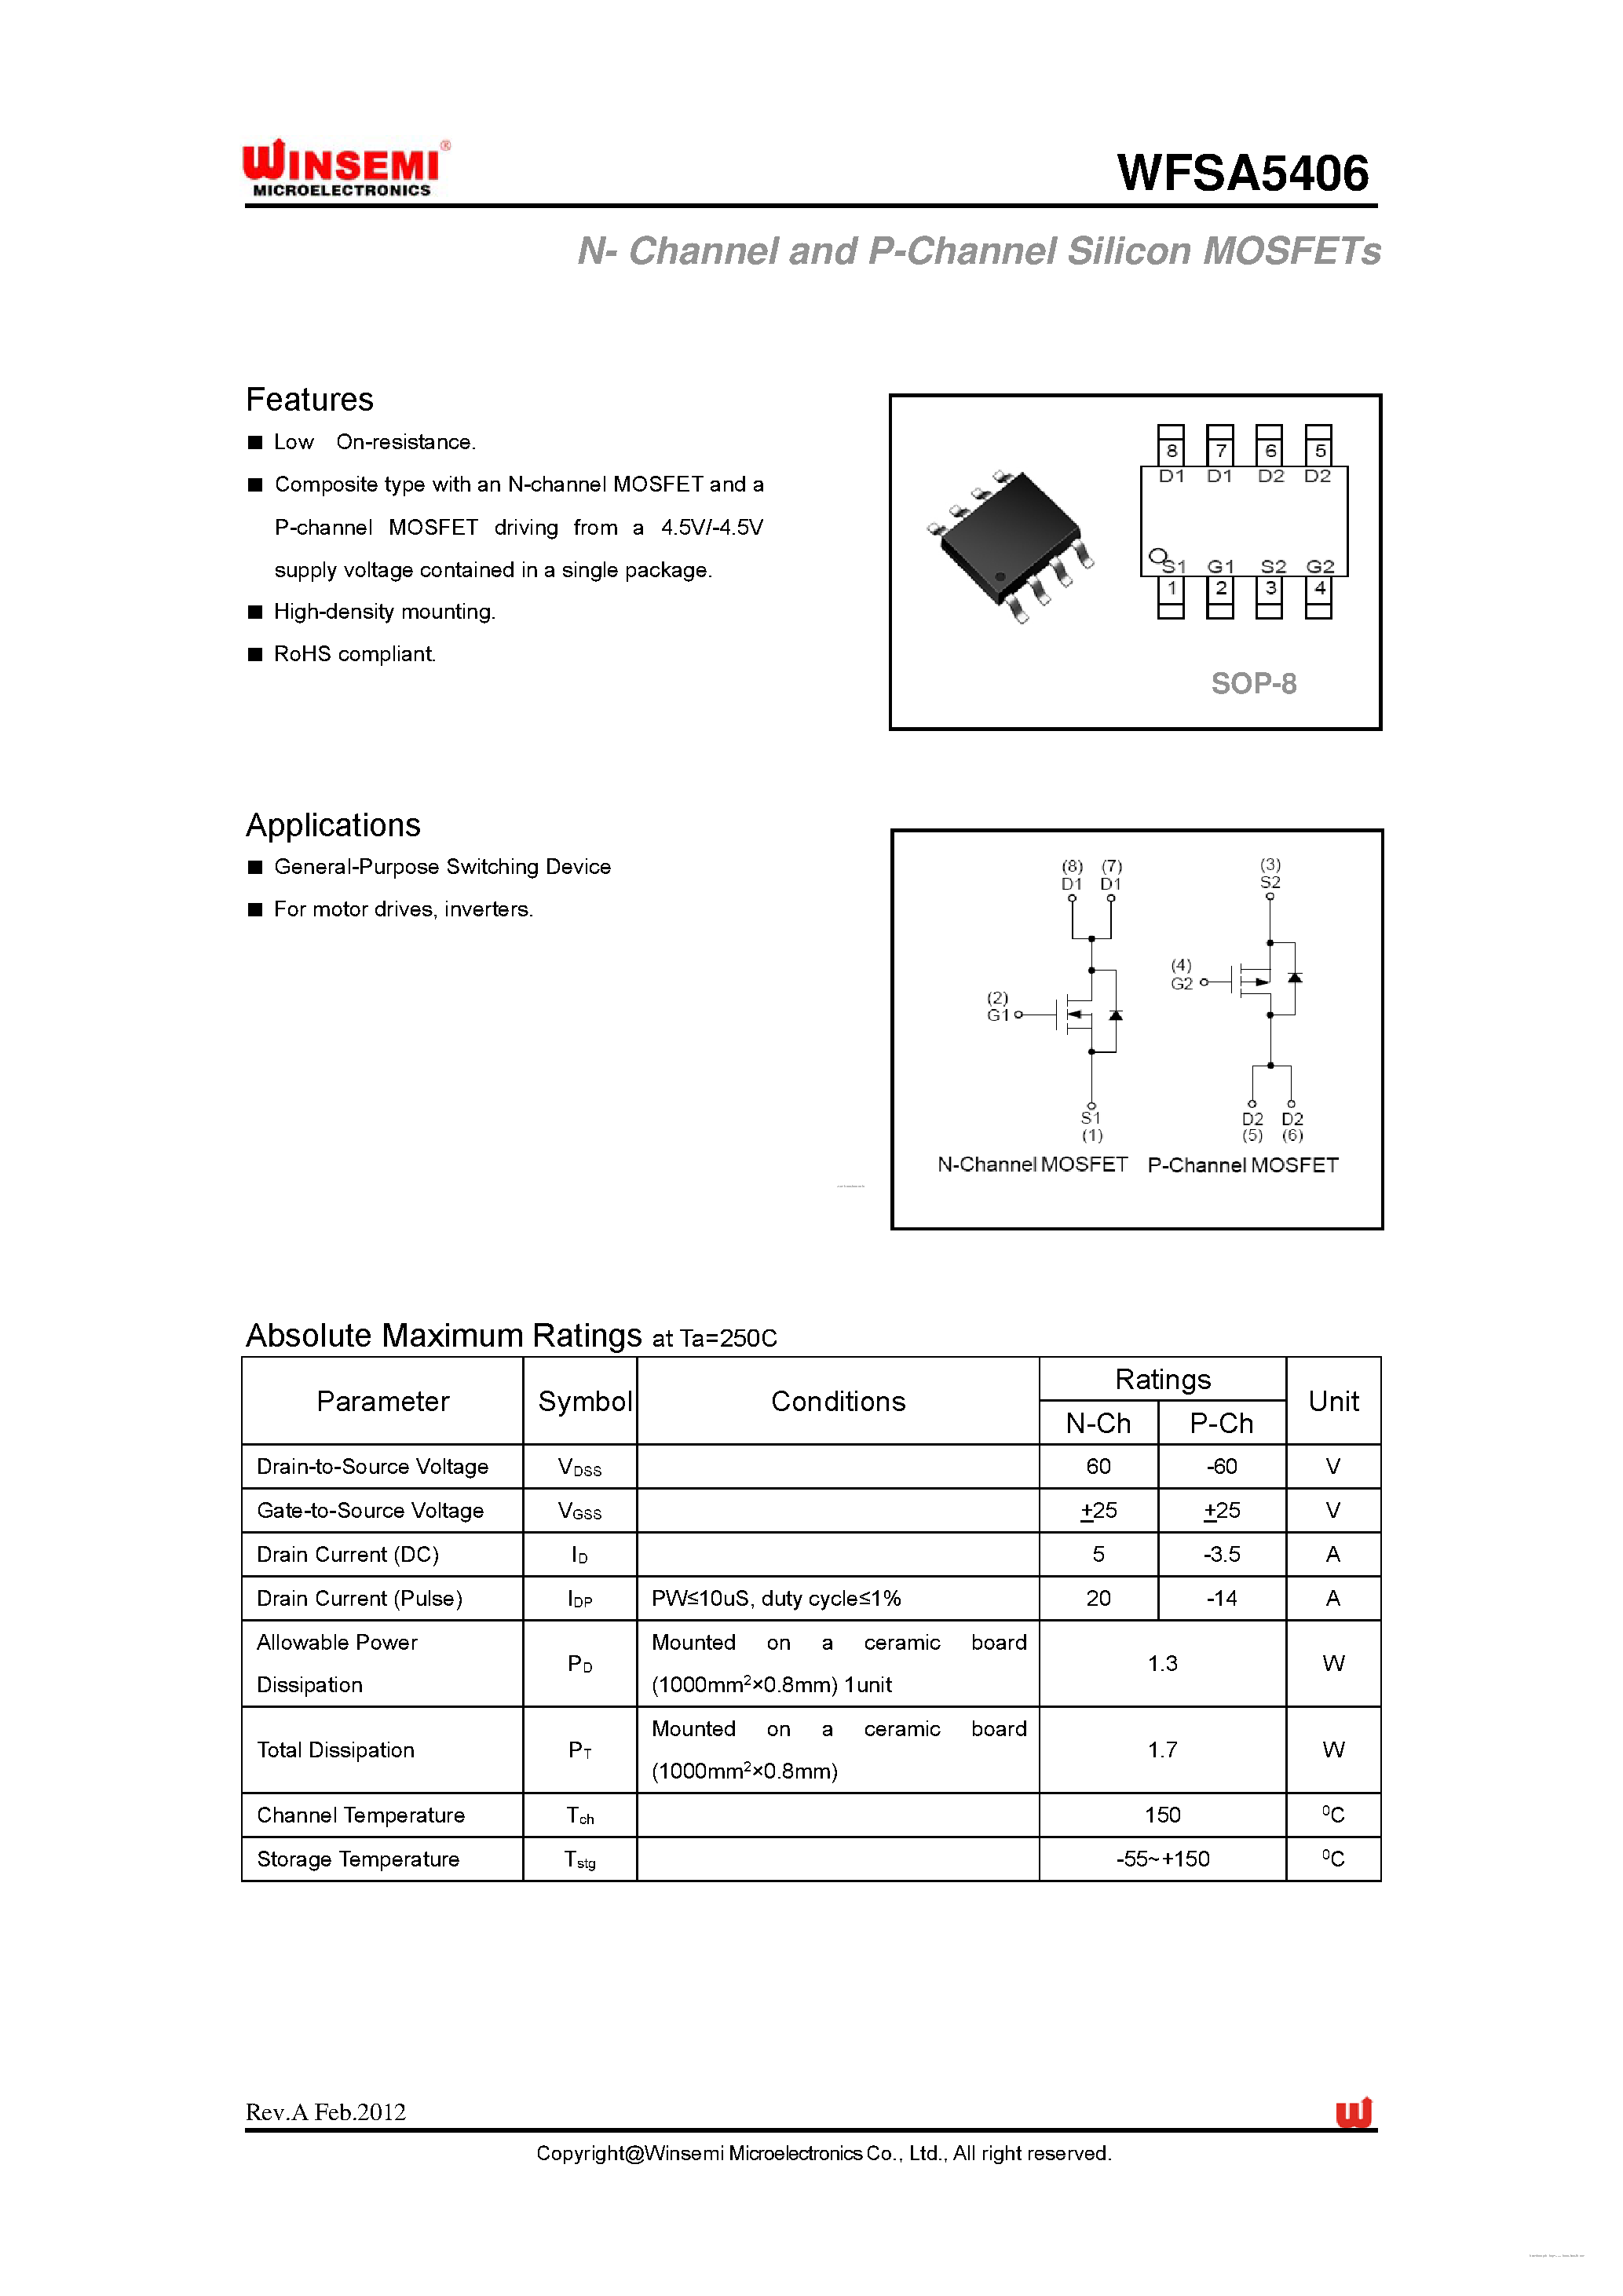 Datasheet WFSA5406 - N- Channel and P-Channel Silicon MOSFETs page 1